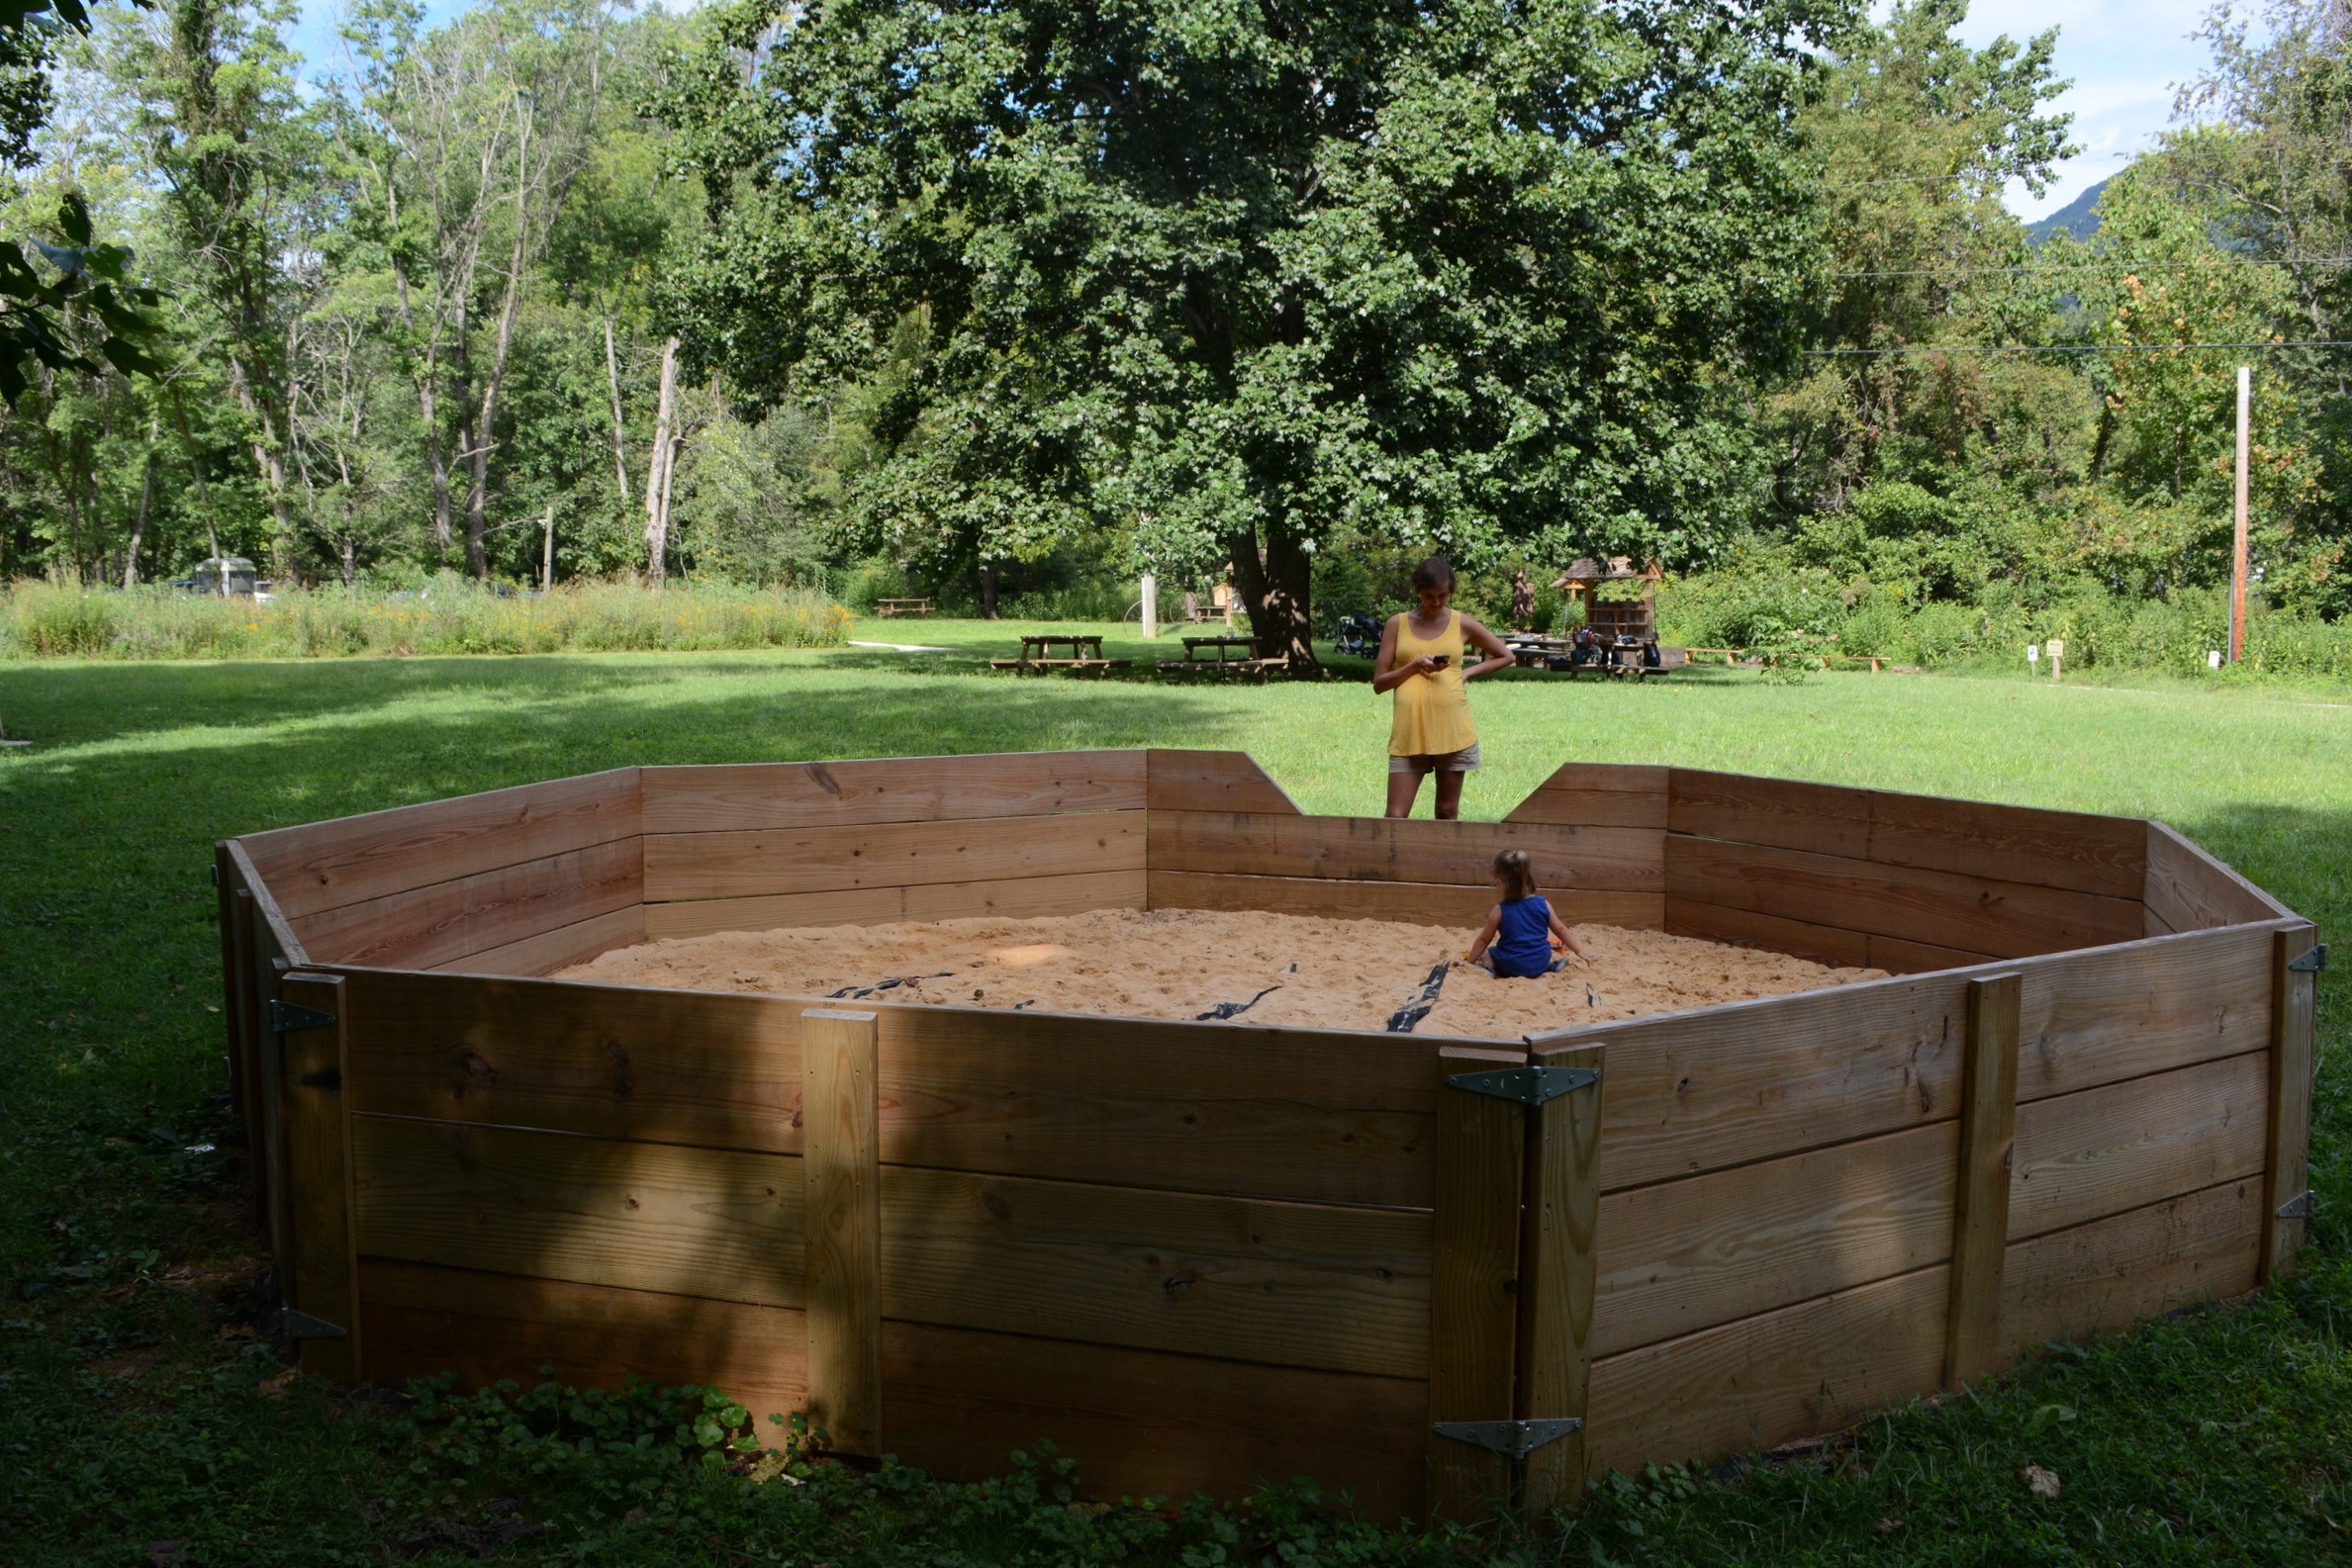 The huge sandbox is another must-do for most.